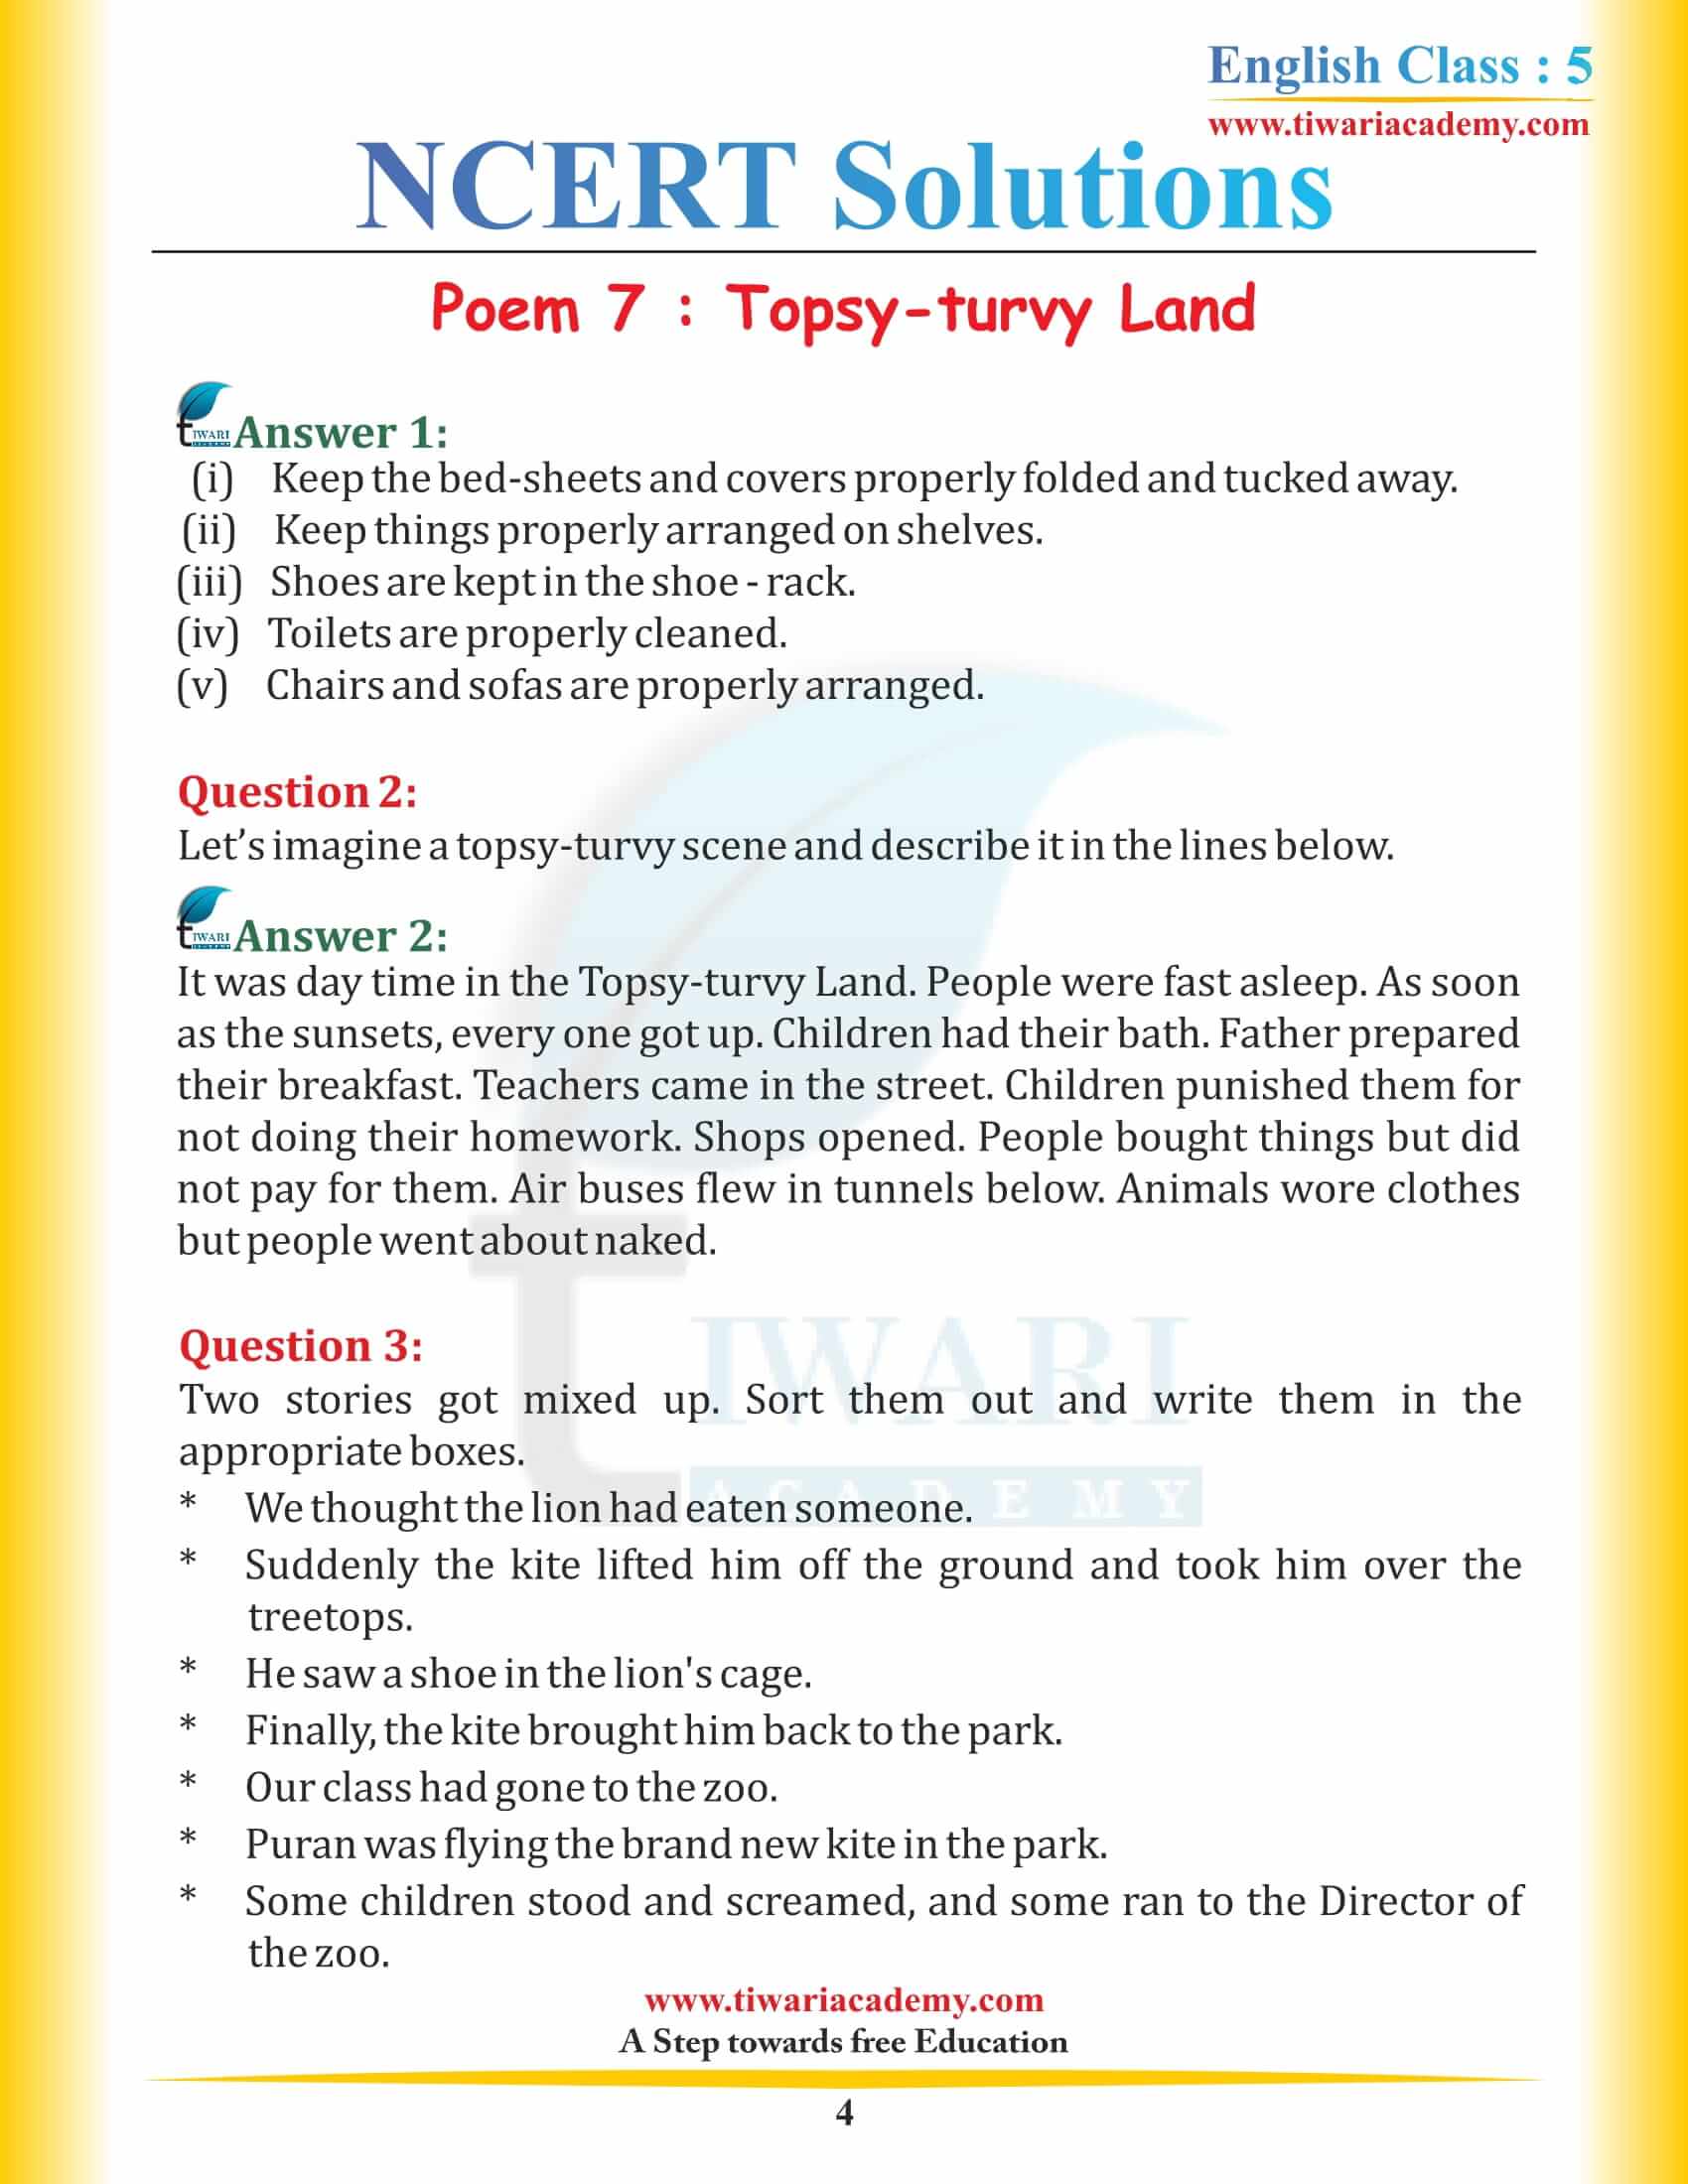 NCERT Solutions for Class 5 English Chapter 7 Topsy-turvy Land in PDF